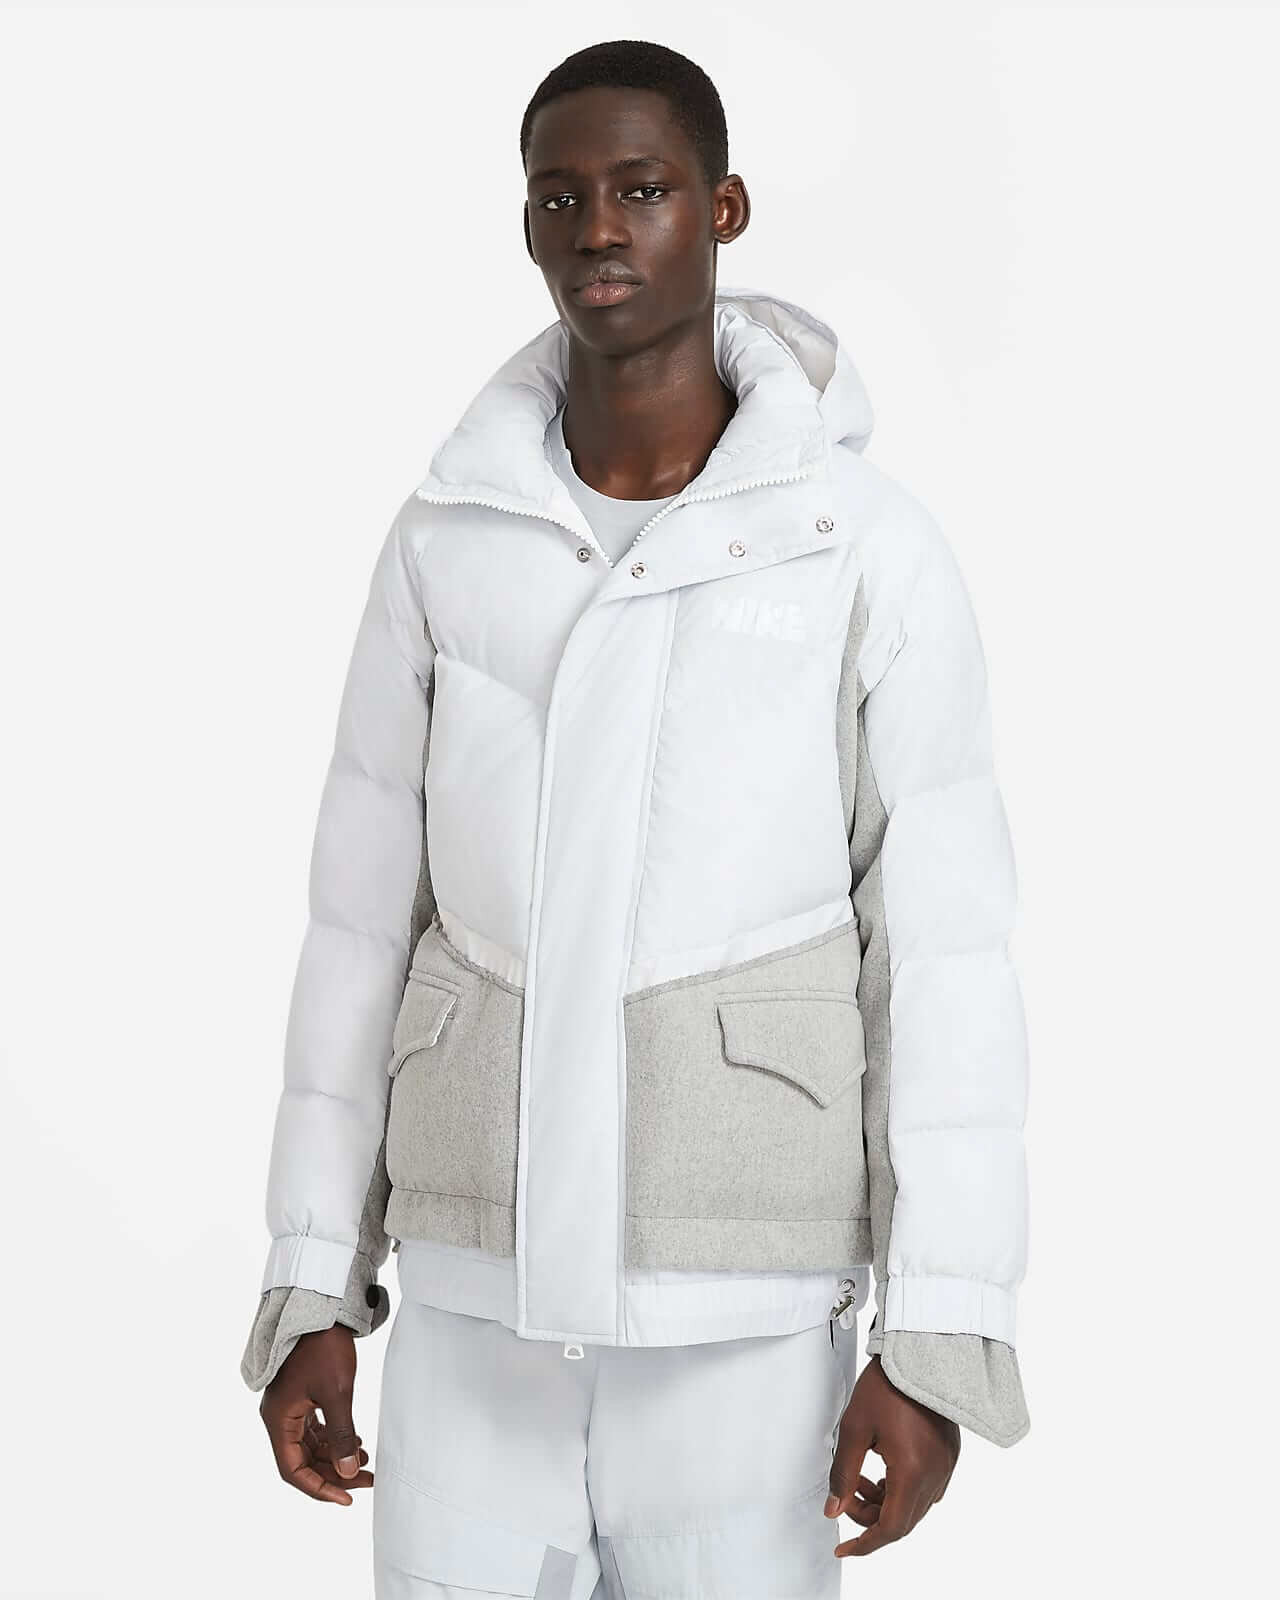 First Look At The Nike x Sacai Outerwear Collection — CNK Daily ...